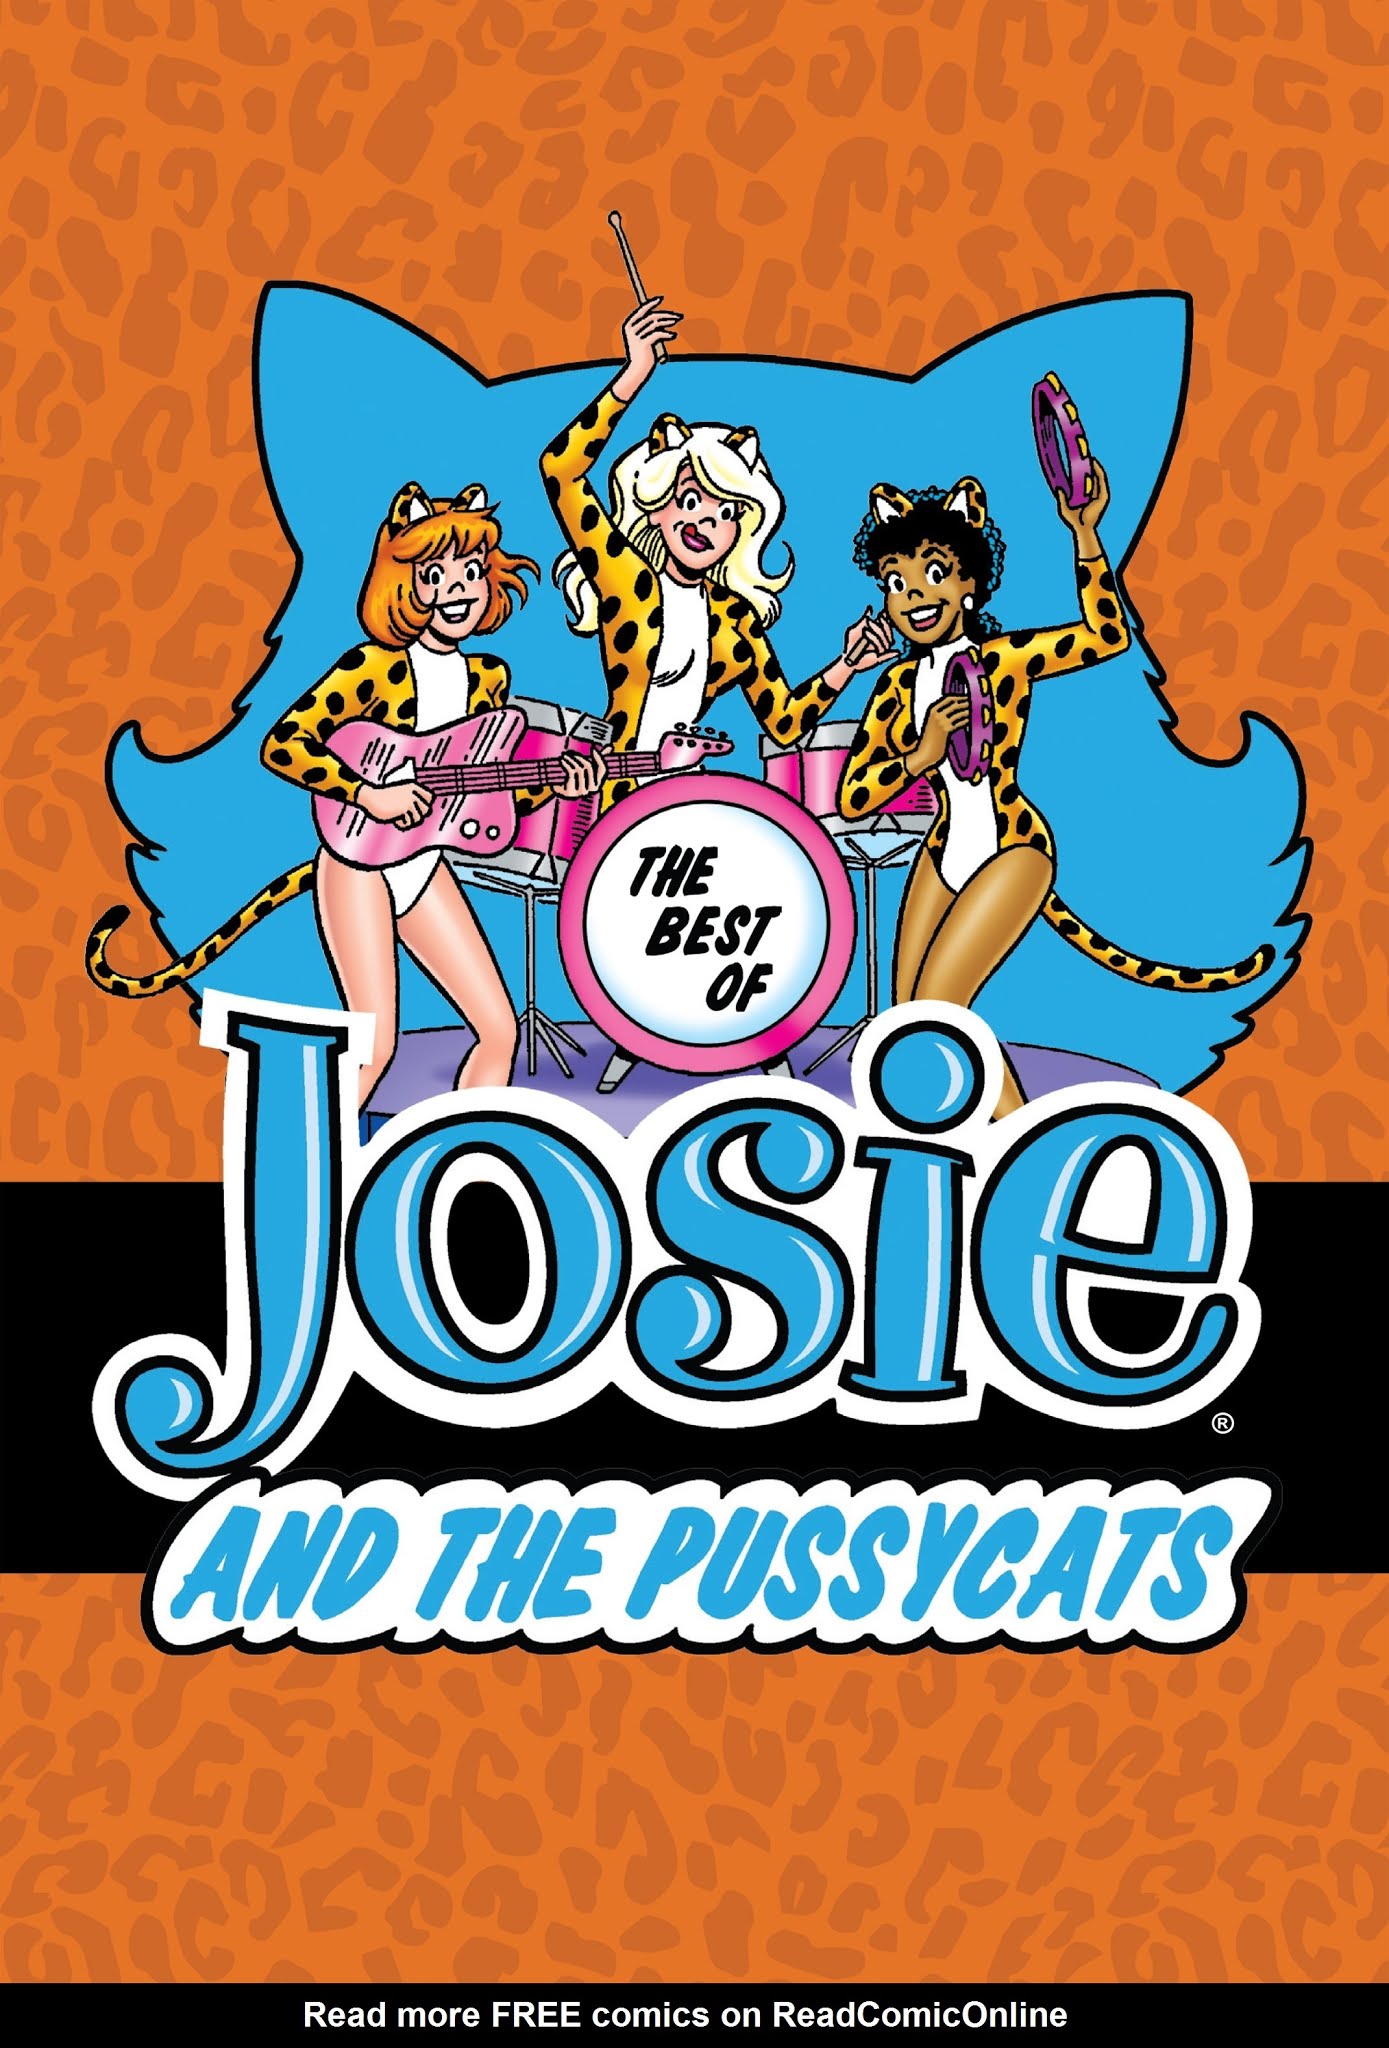 Read online The Best of Josie and the Pussycats comic -  Issue # TPB (Part 1) - 3